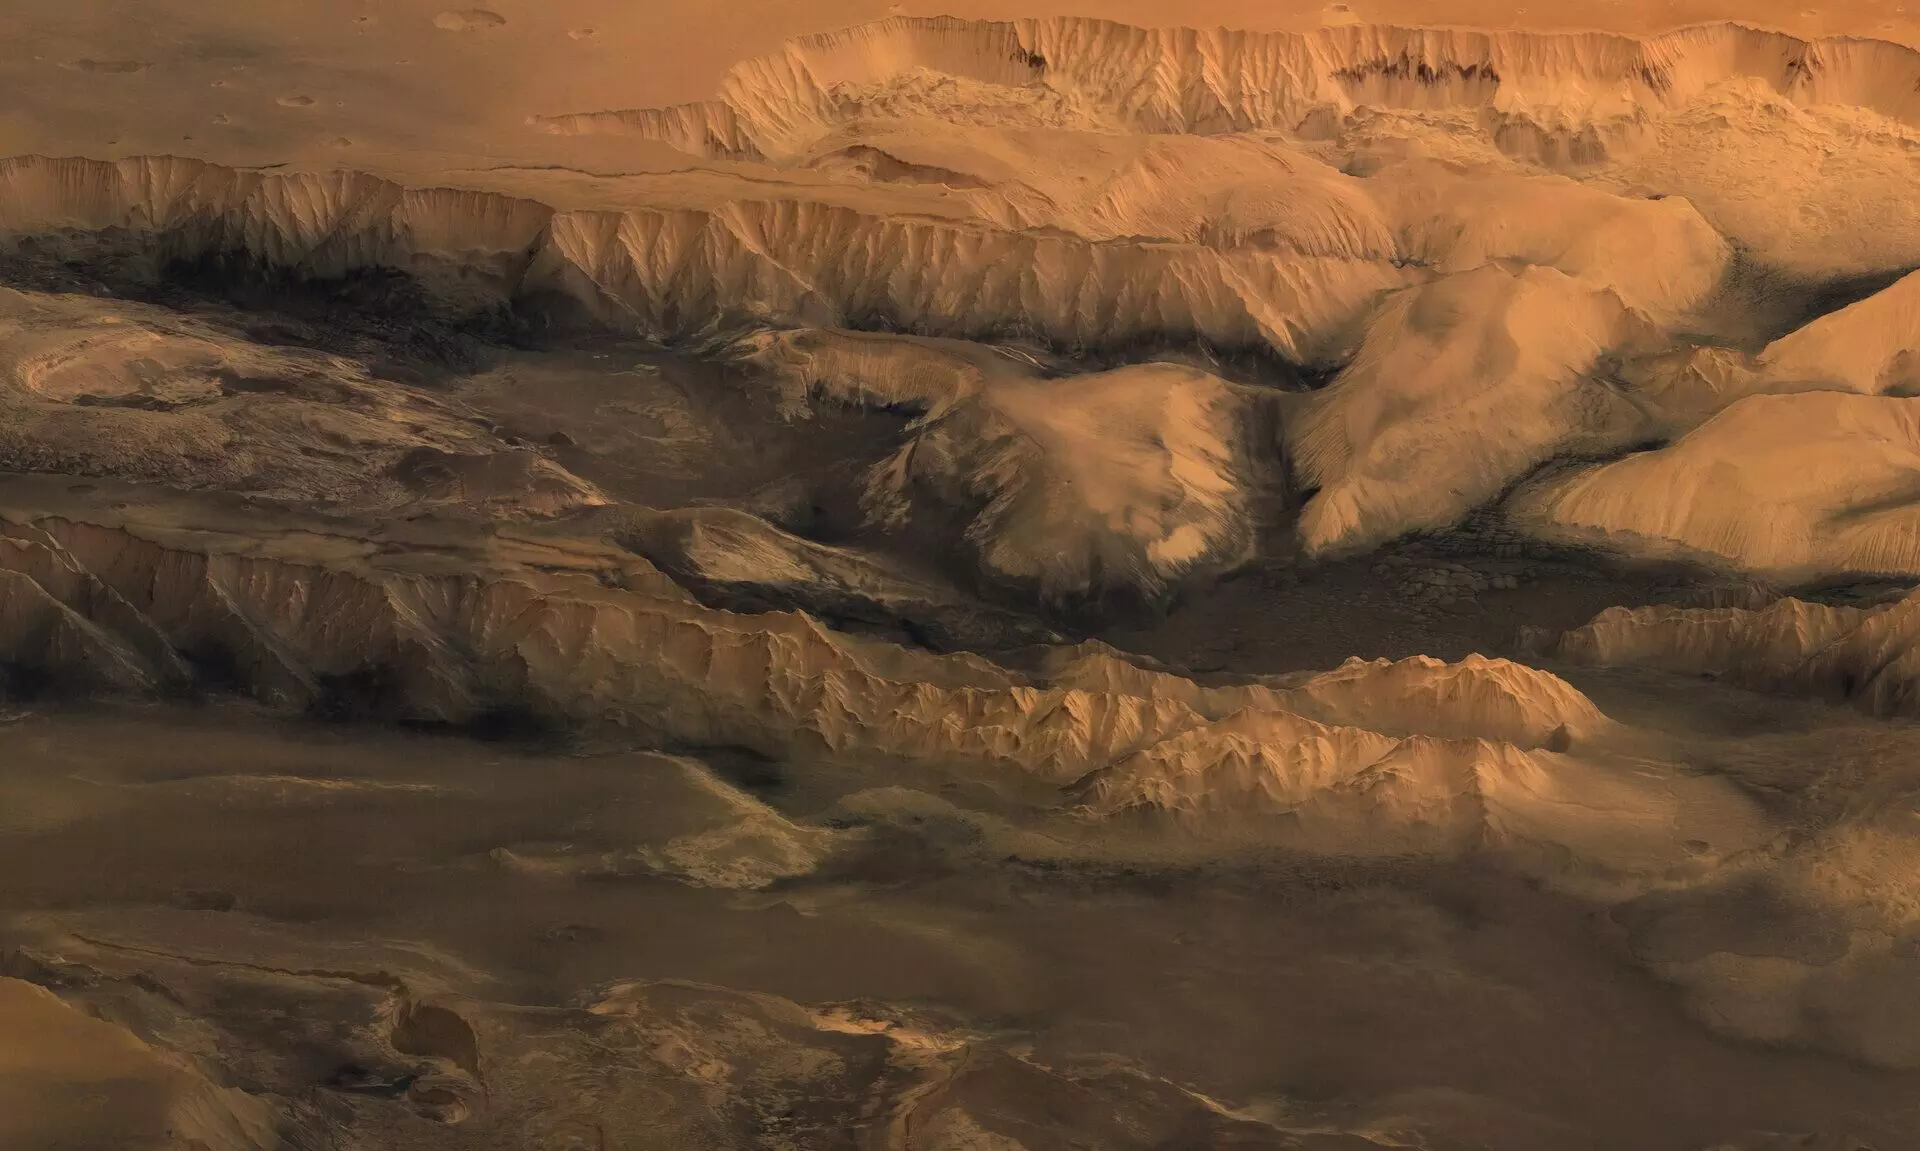 Largest canyon in our solar system found on Mars: ESA